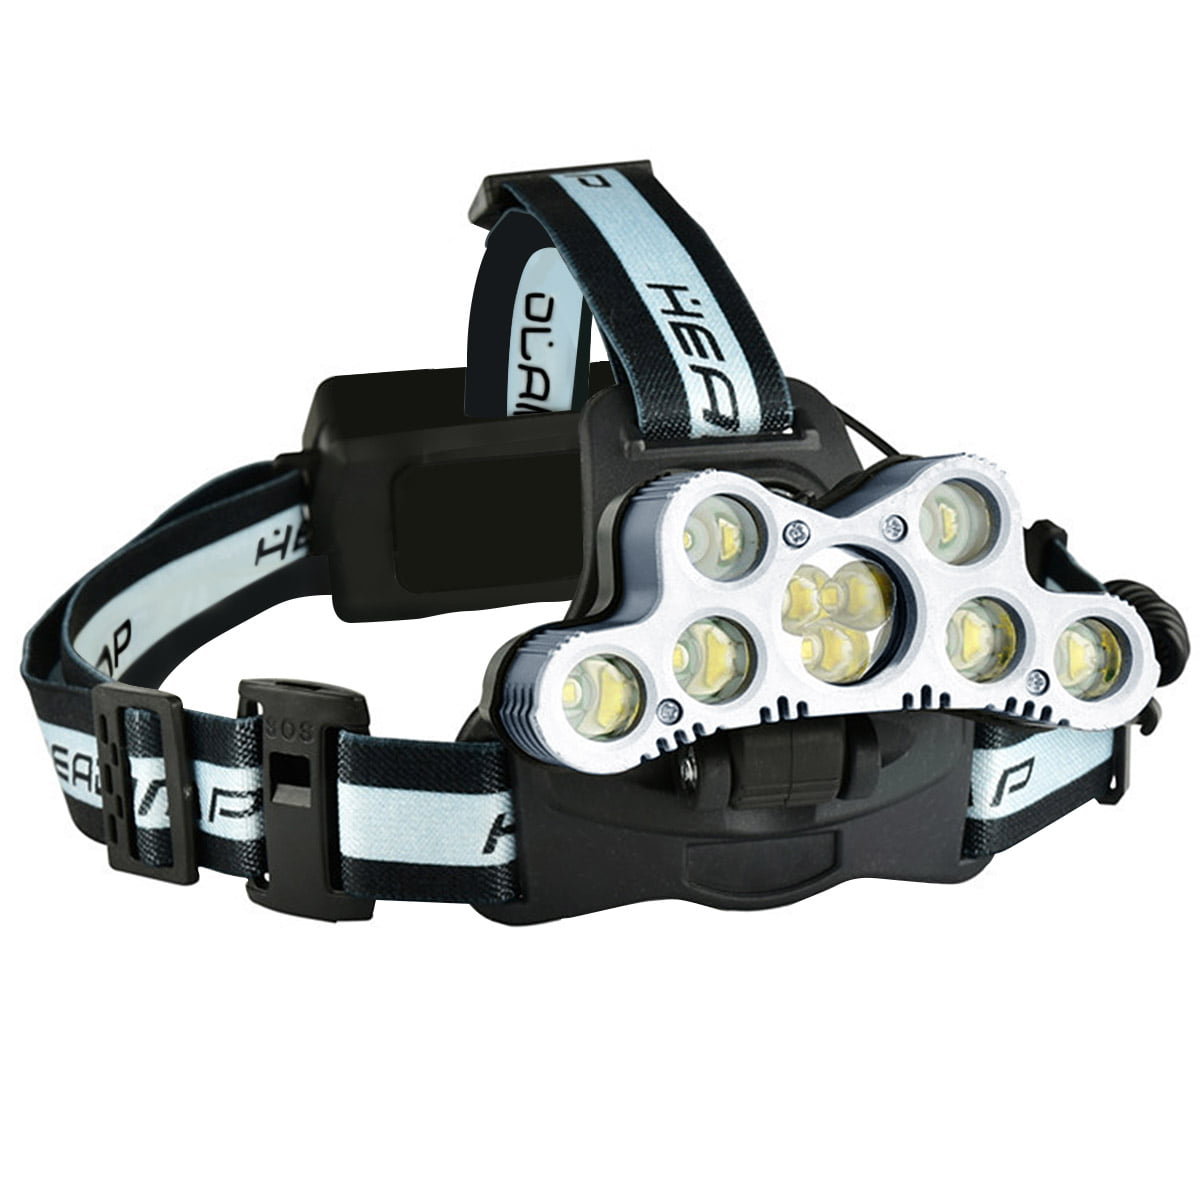 8500Lm Rechargeable Cree XML T6 2R5 3 LED Headlamp Tactical Head Light Torch Set 